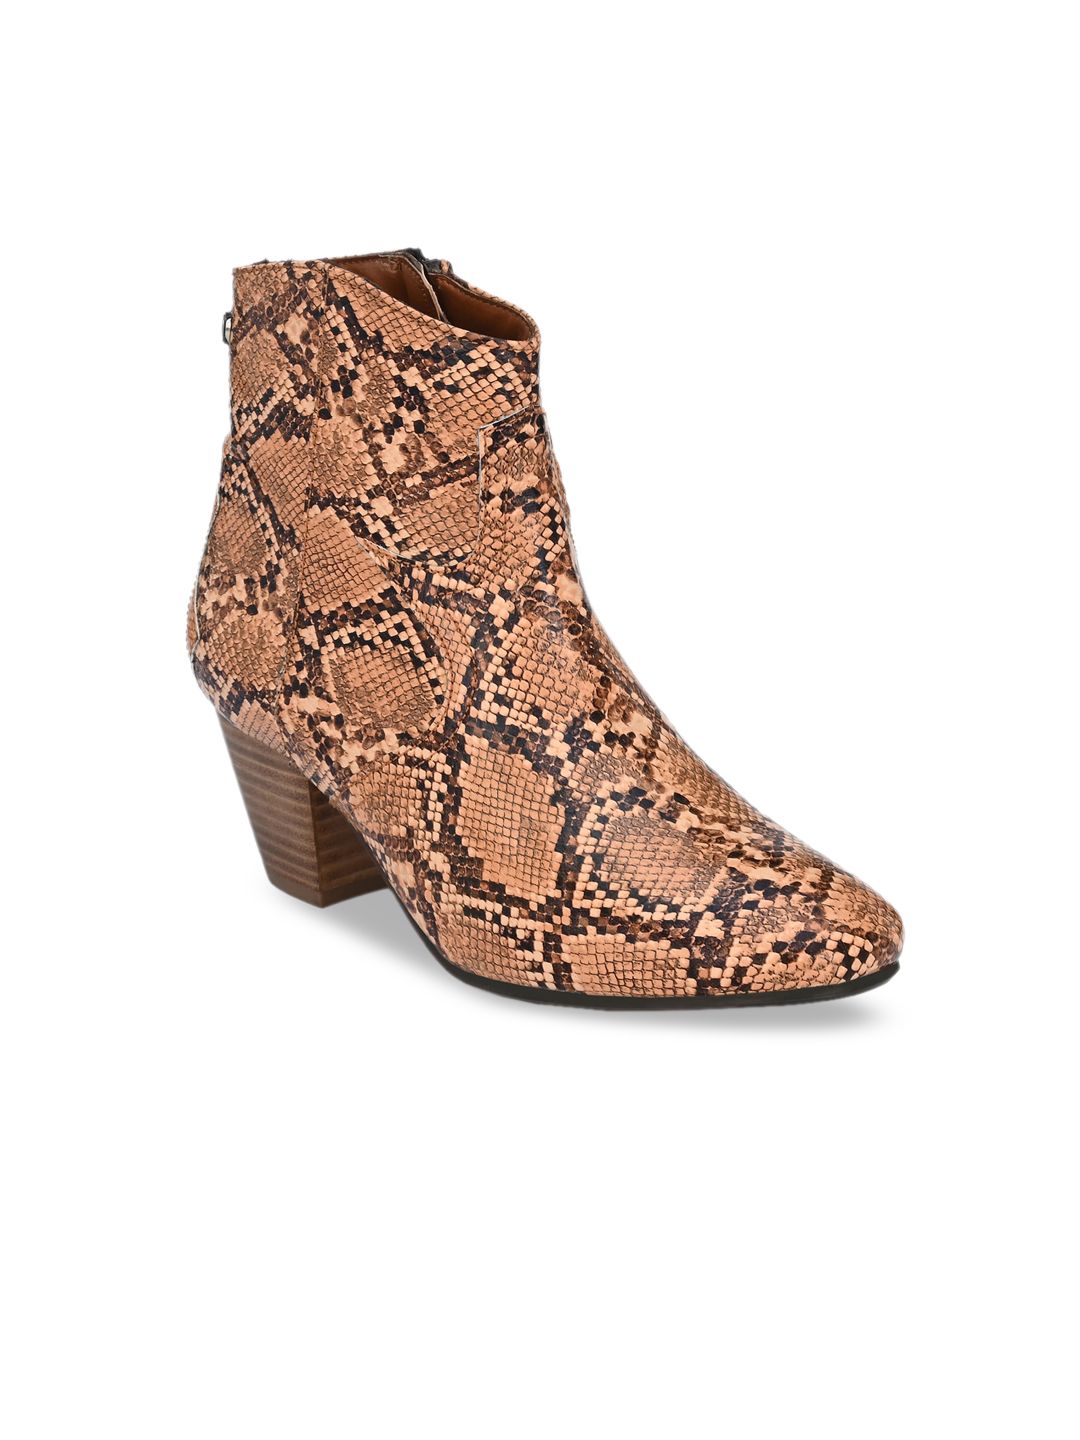 Delize Brown Snake-SKin Printed Block Heeled Boots Price in India